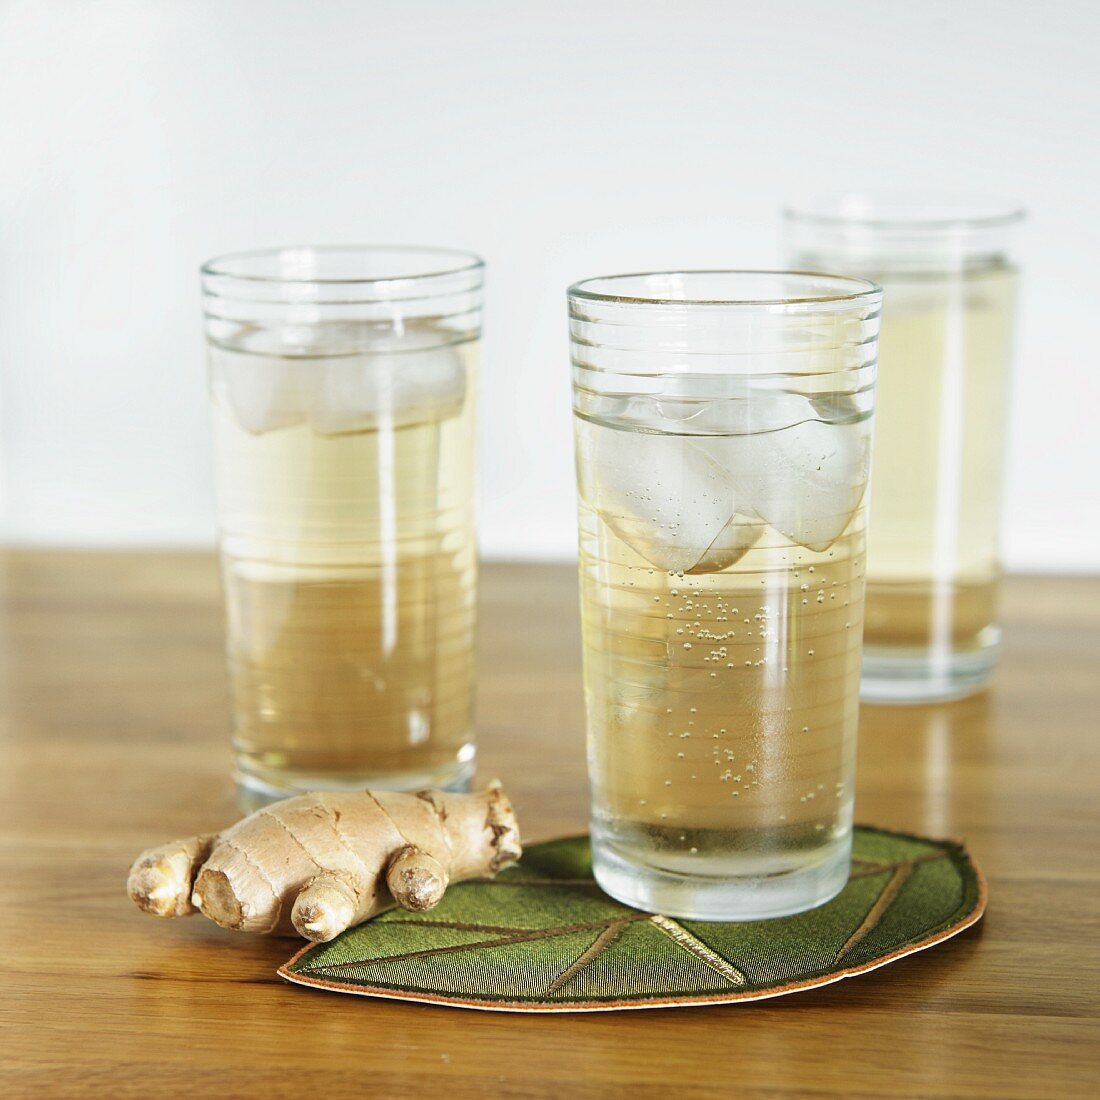 Glasses of Homemade Ginger Ale with Fresh Ginger Root